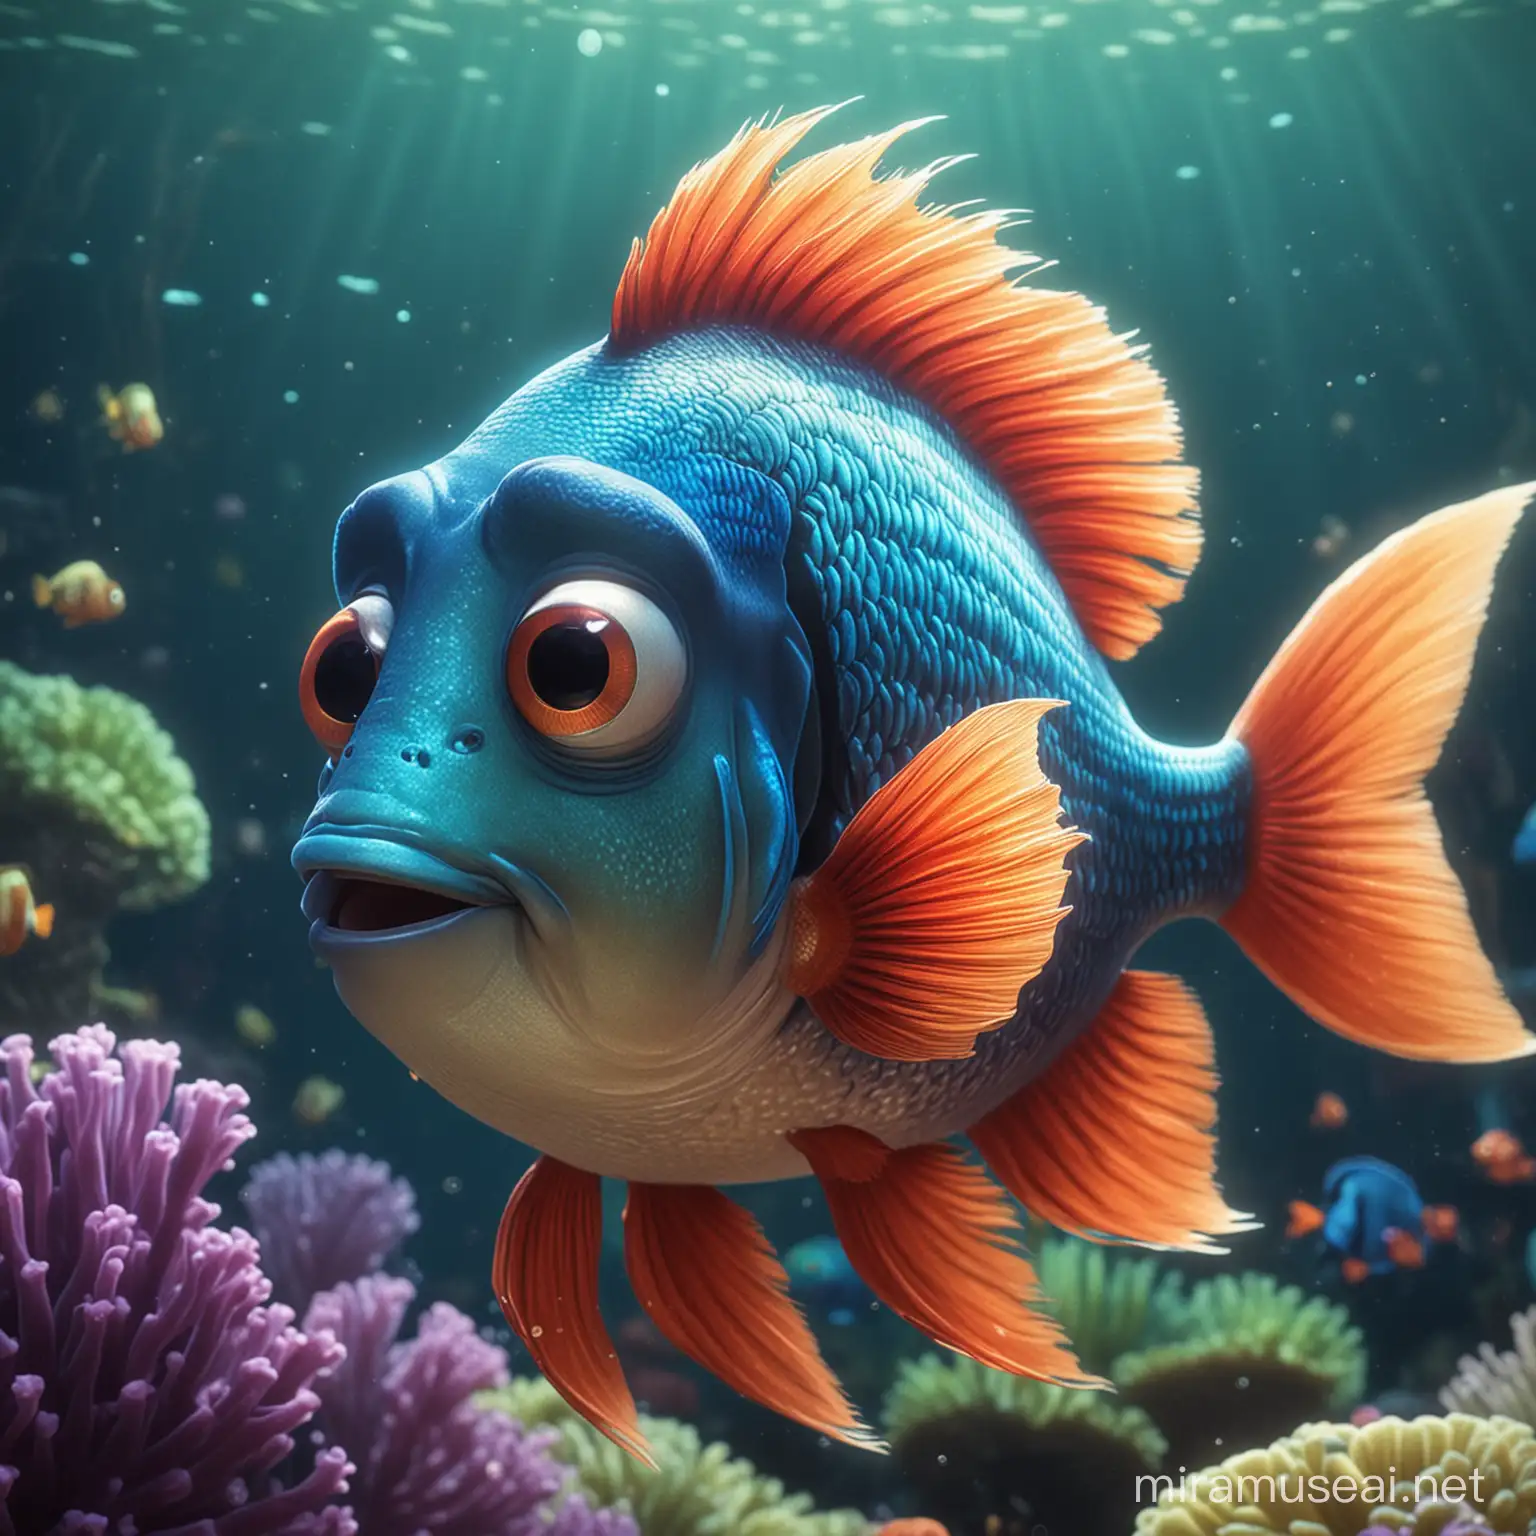 Colorful Tropical Fish Swimming in Disney Pixar Style Animation